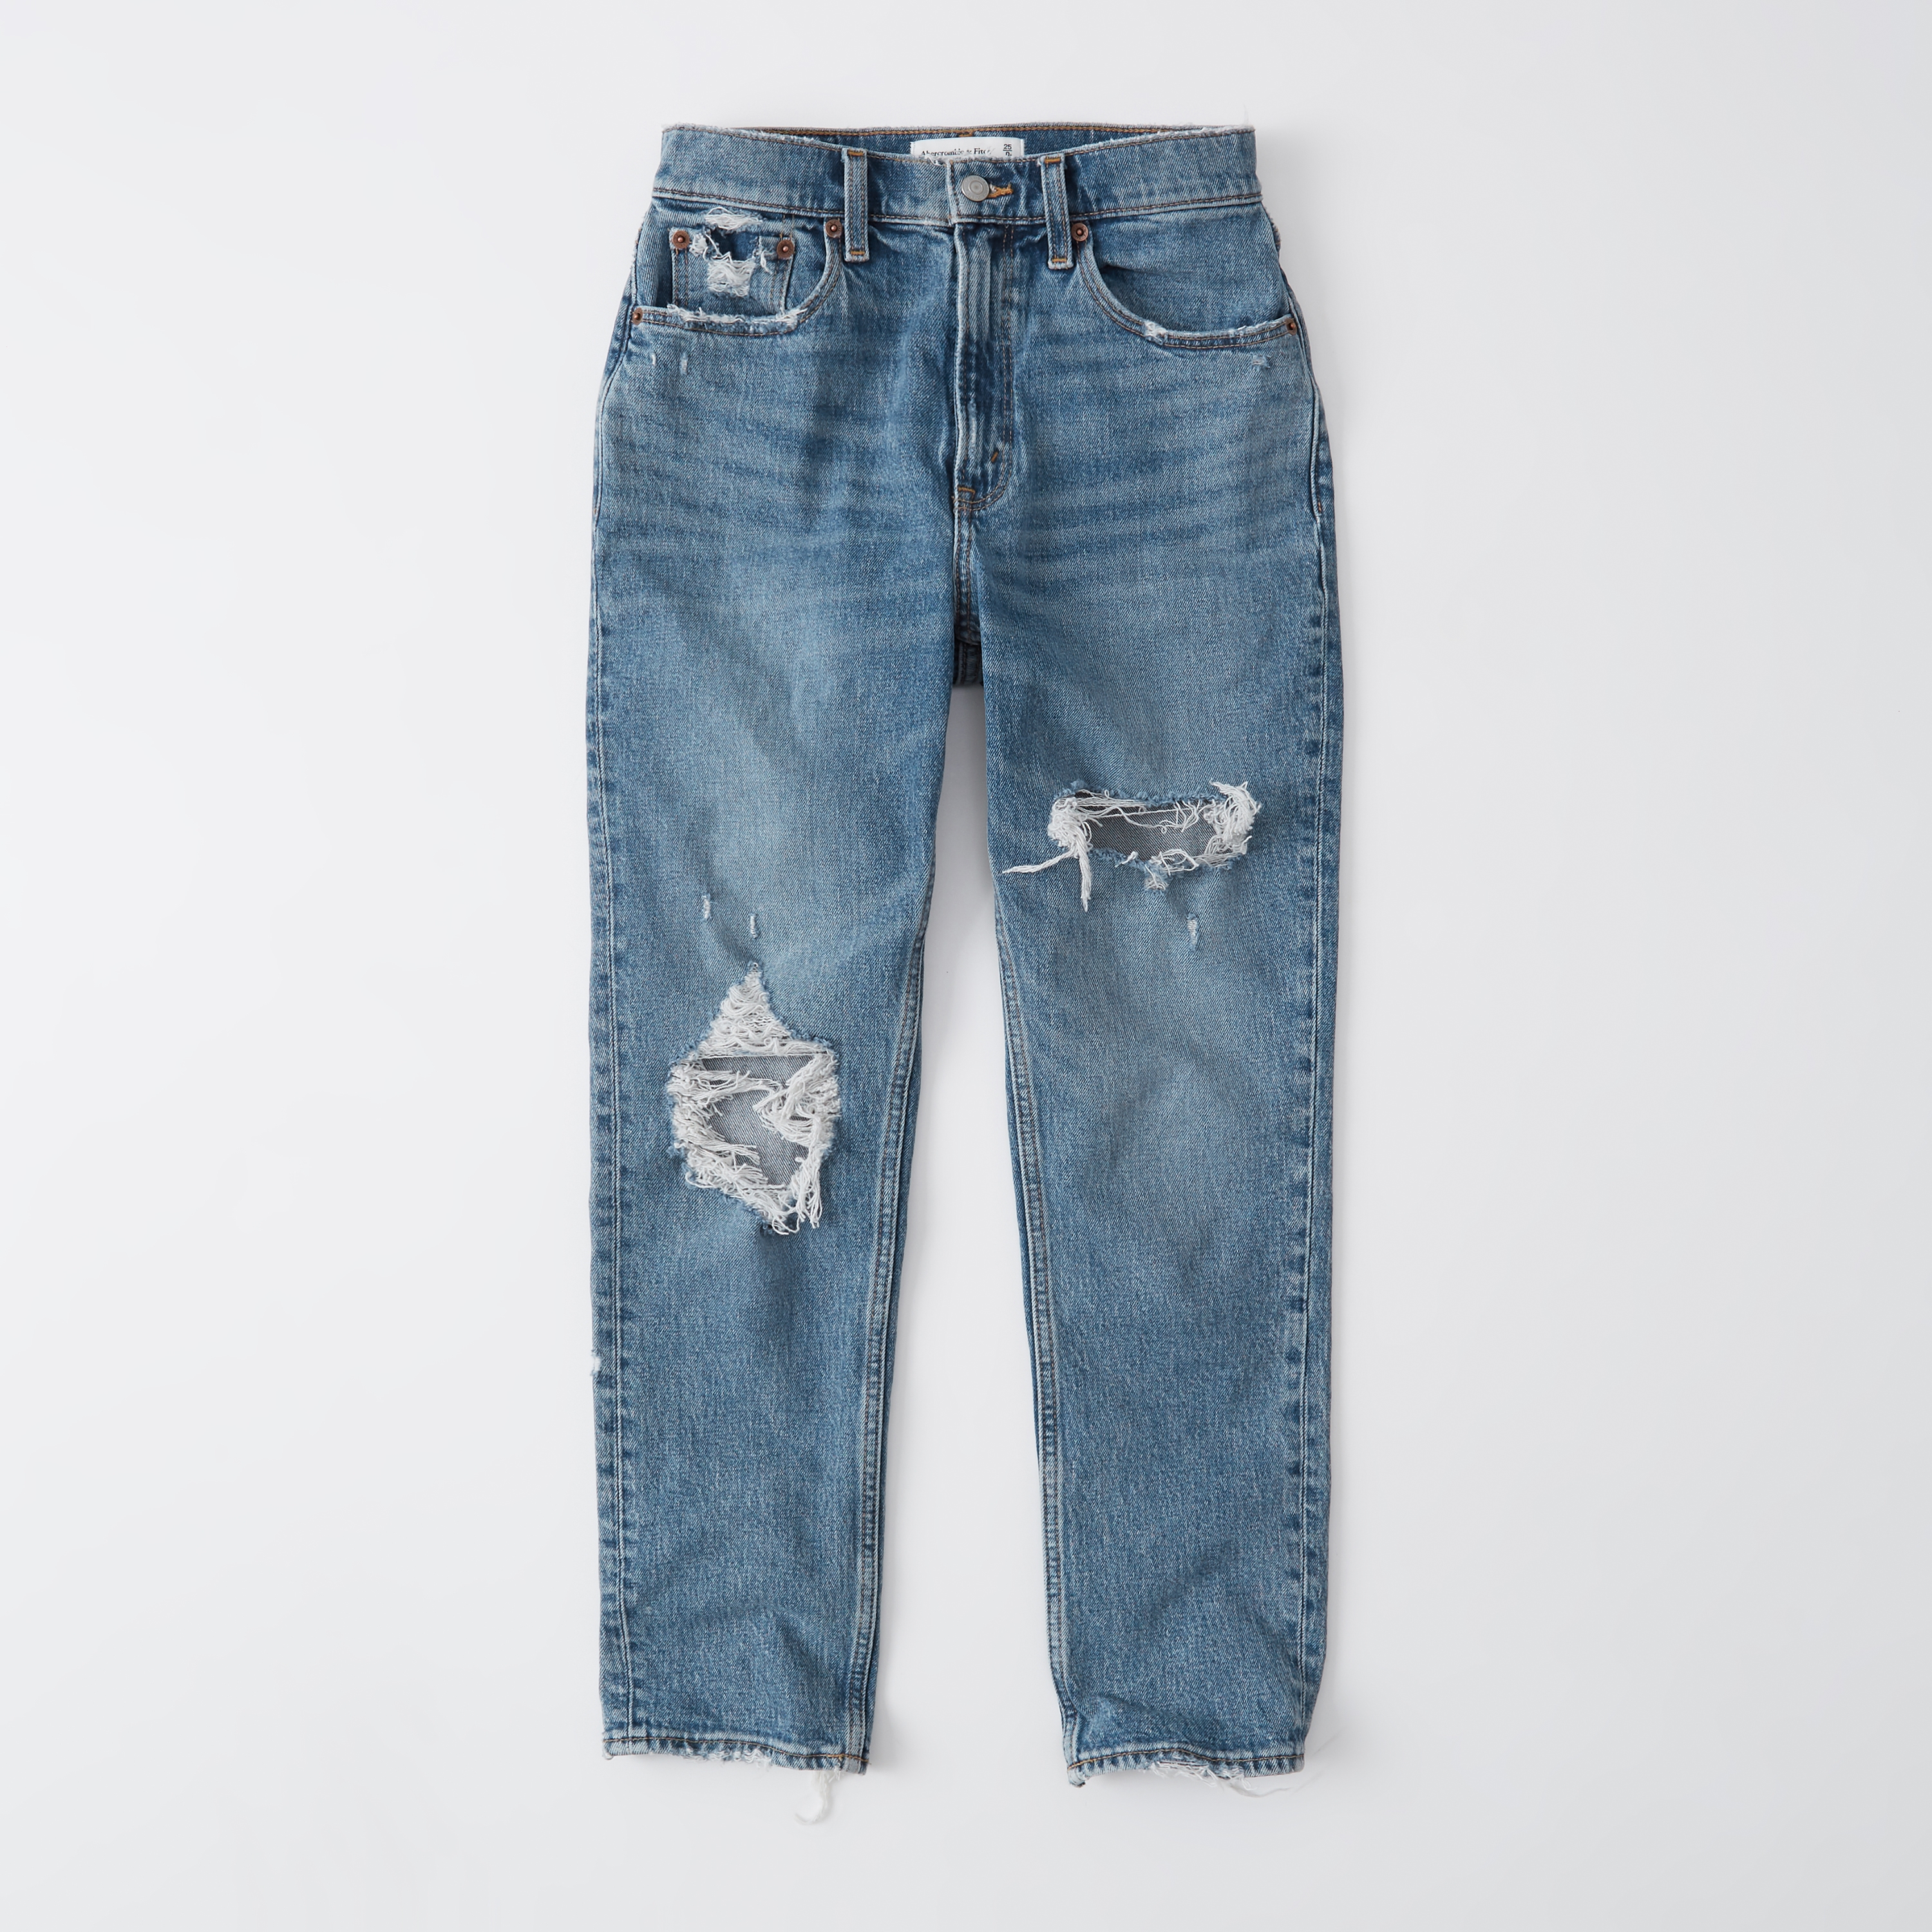 abercrombie & fitch jeans review